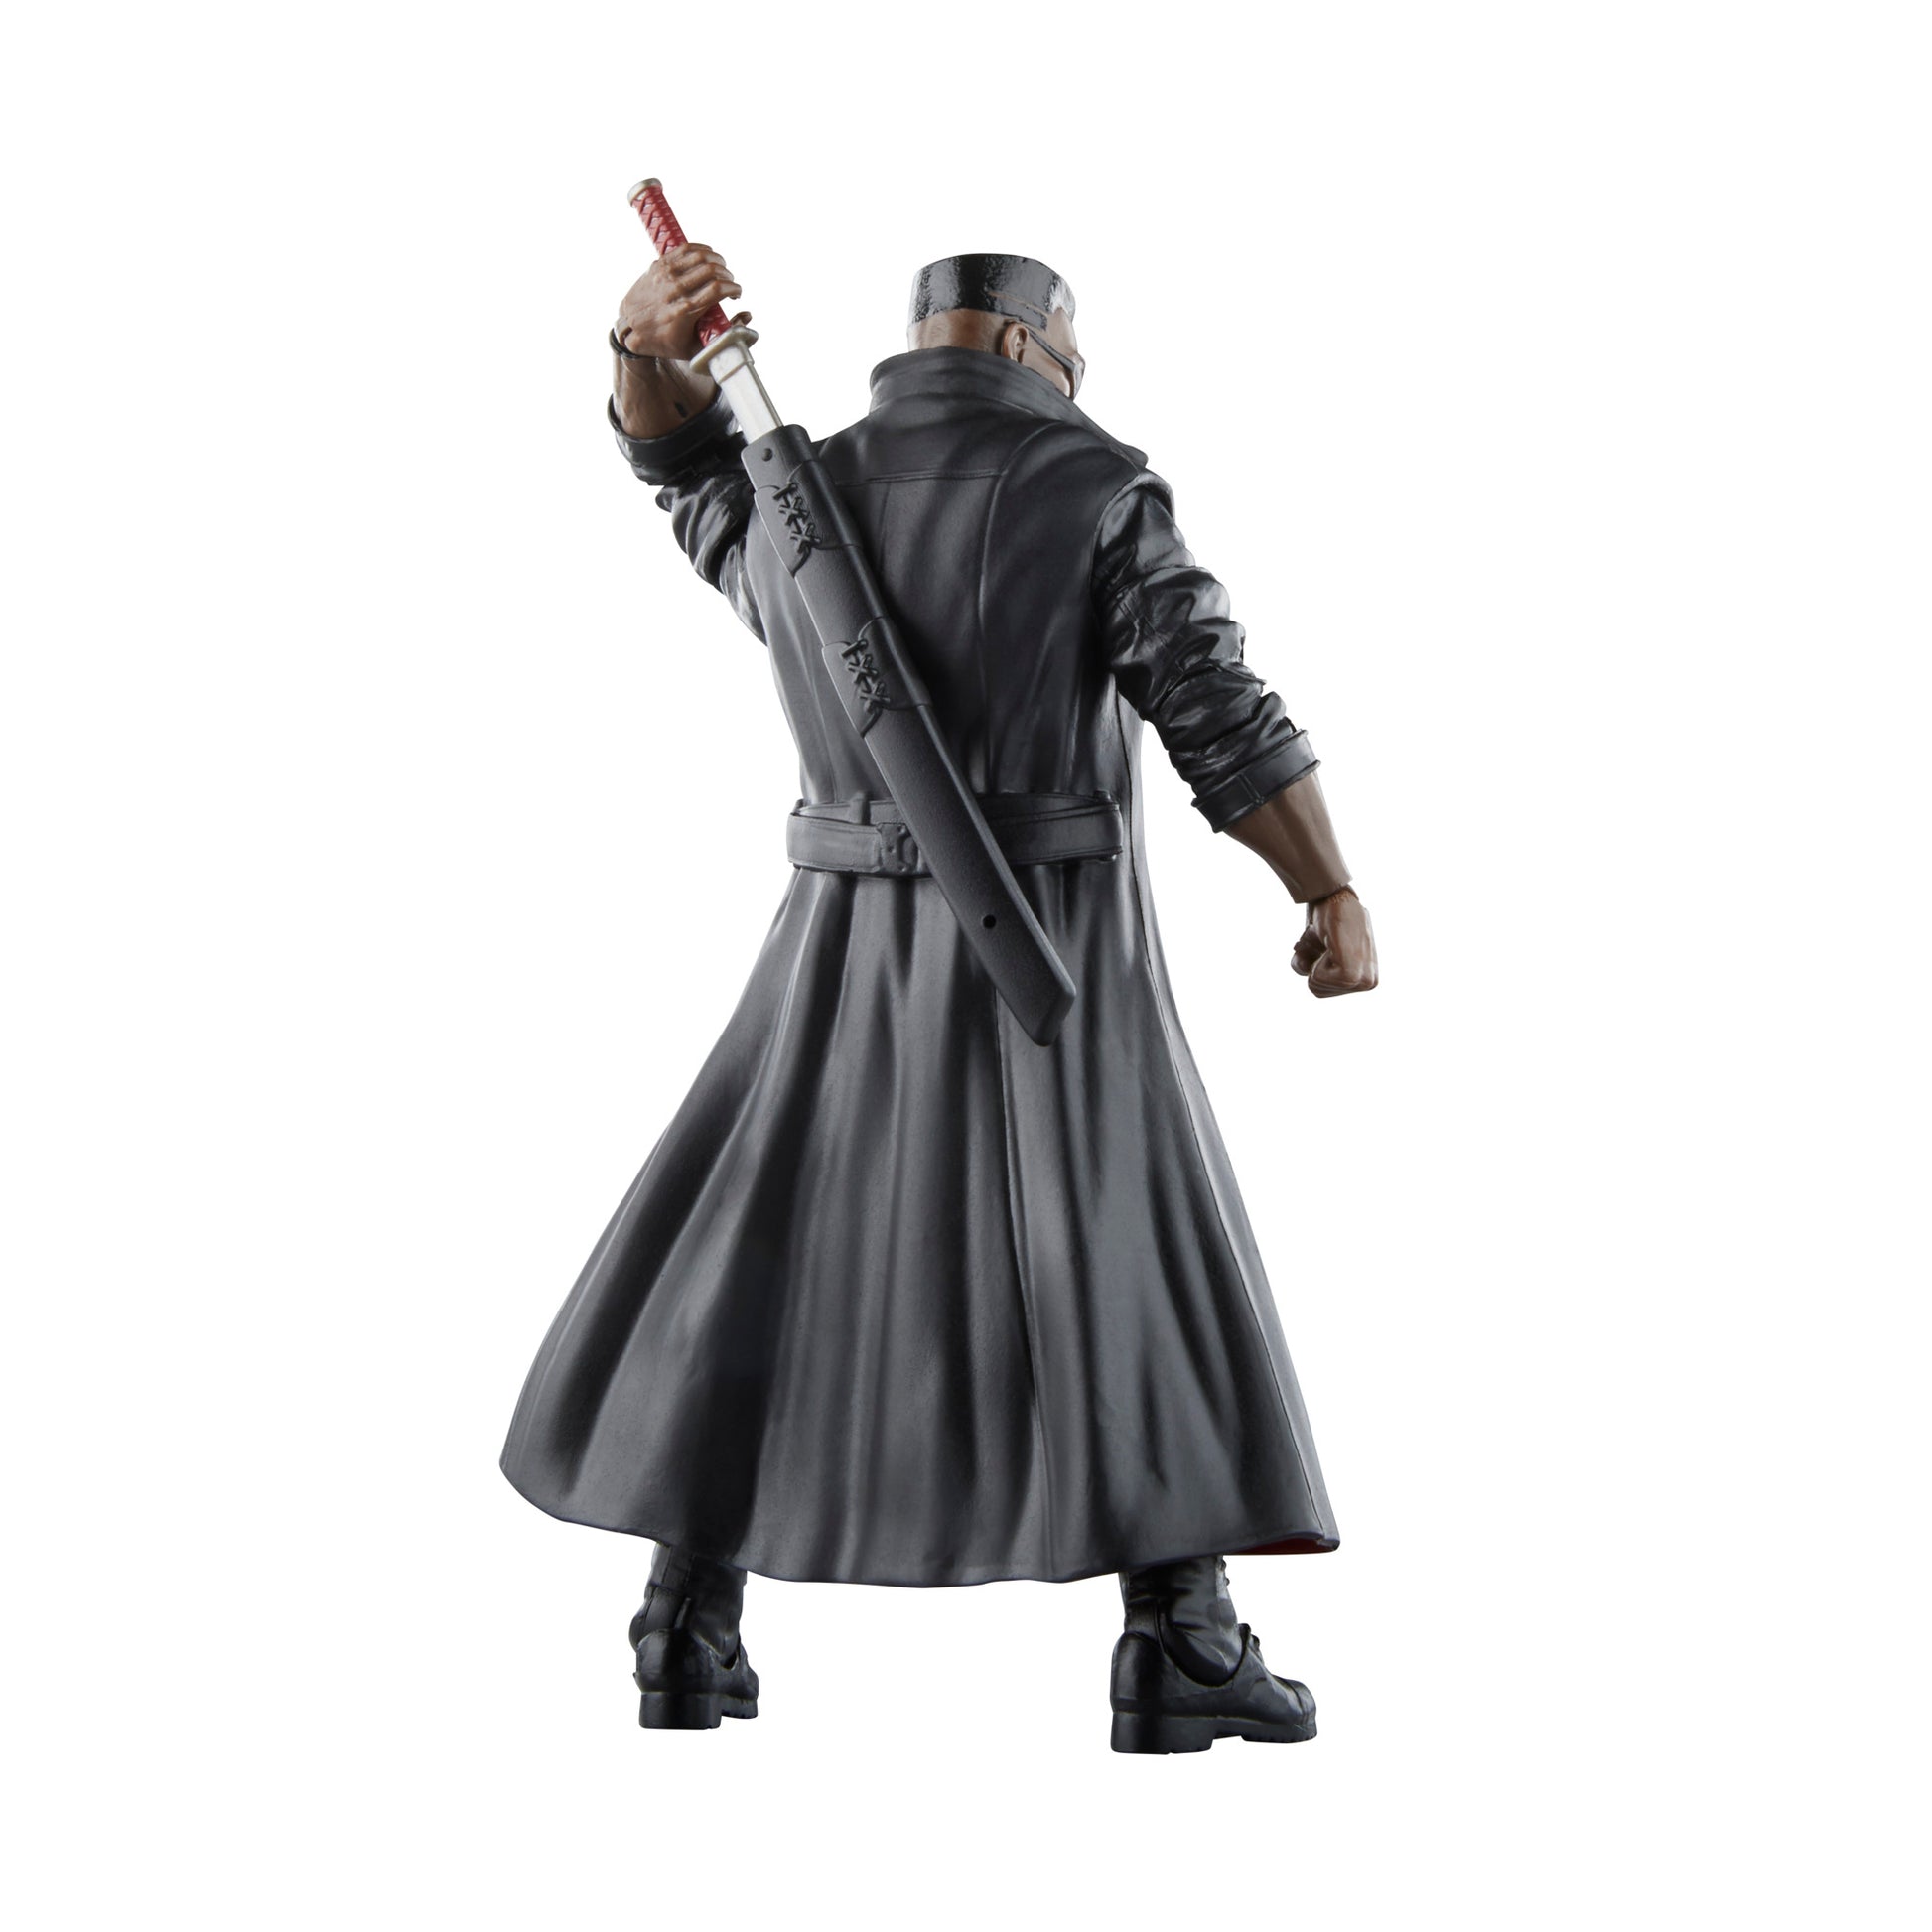 Hasbro Marvel Legends Series Marvel's Blade Action Figure Toy back pose with sword - Heretoserveyou